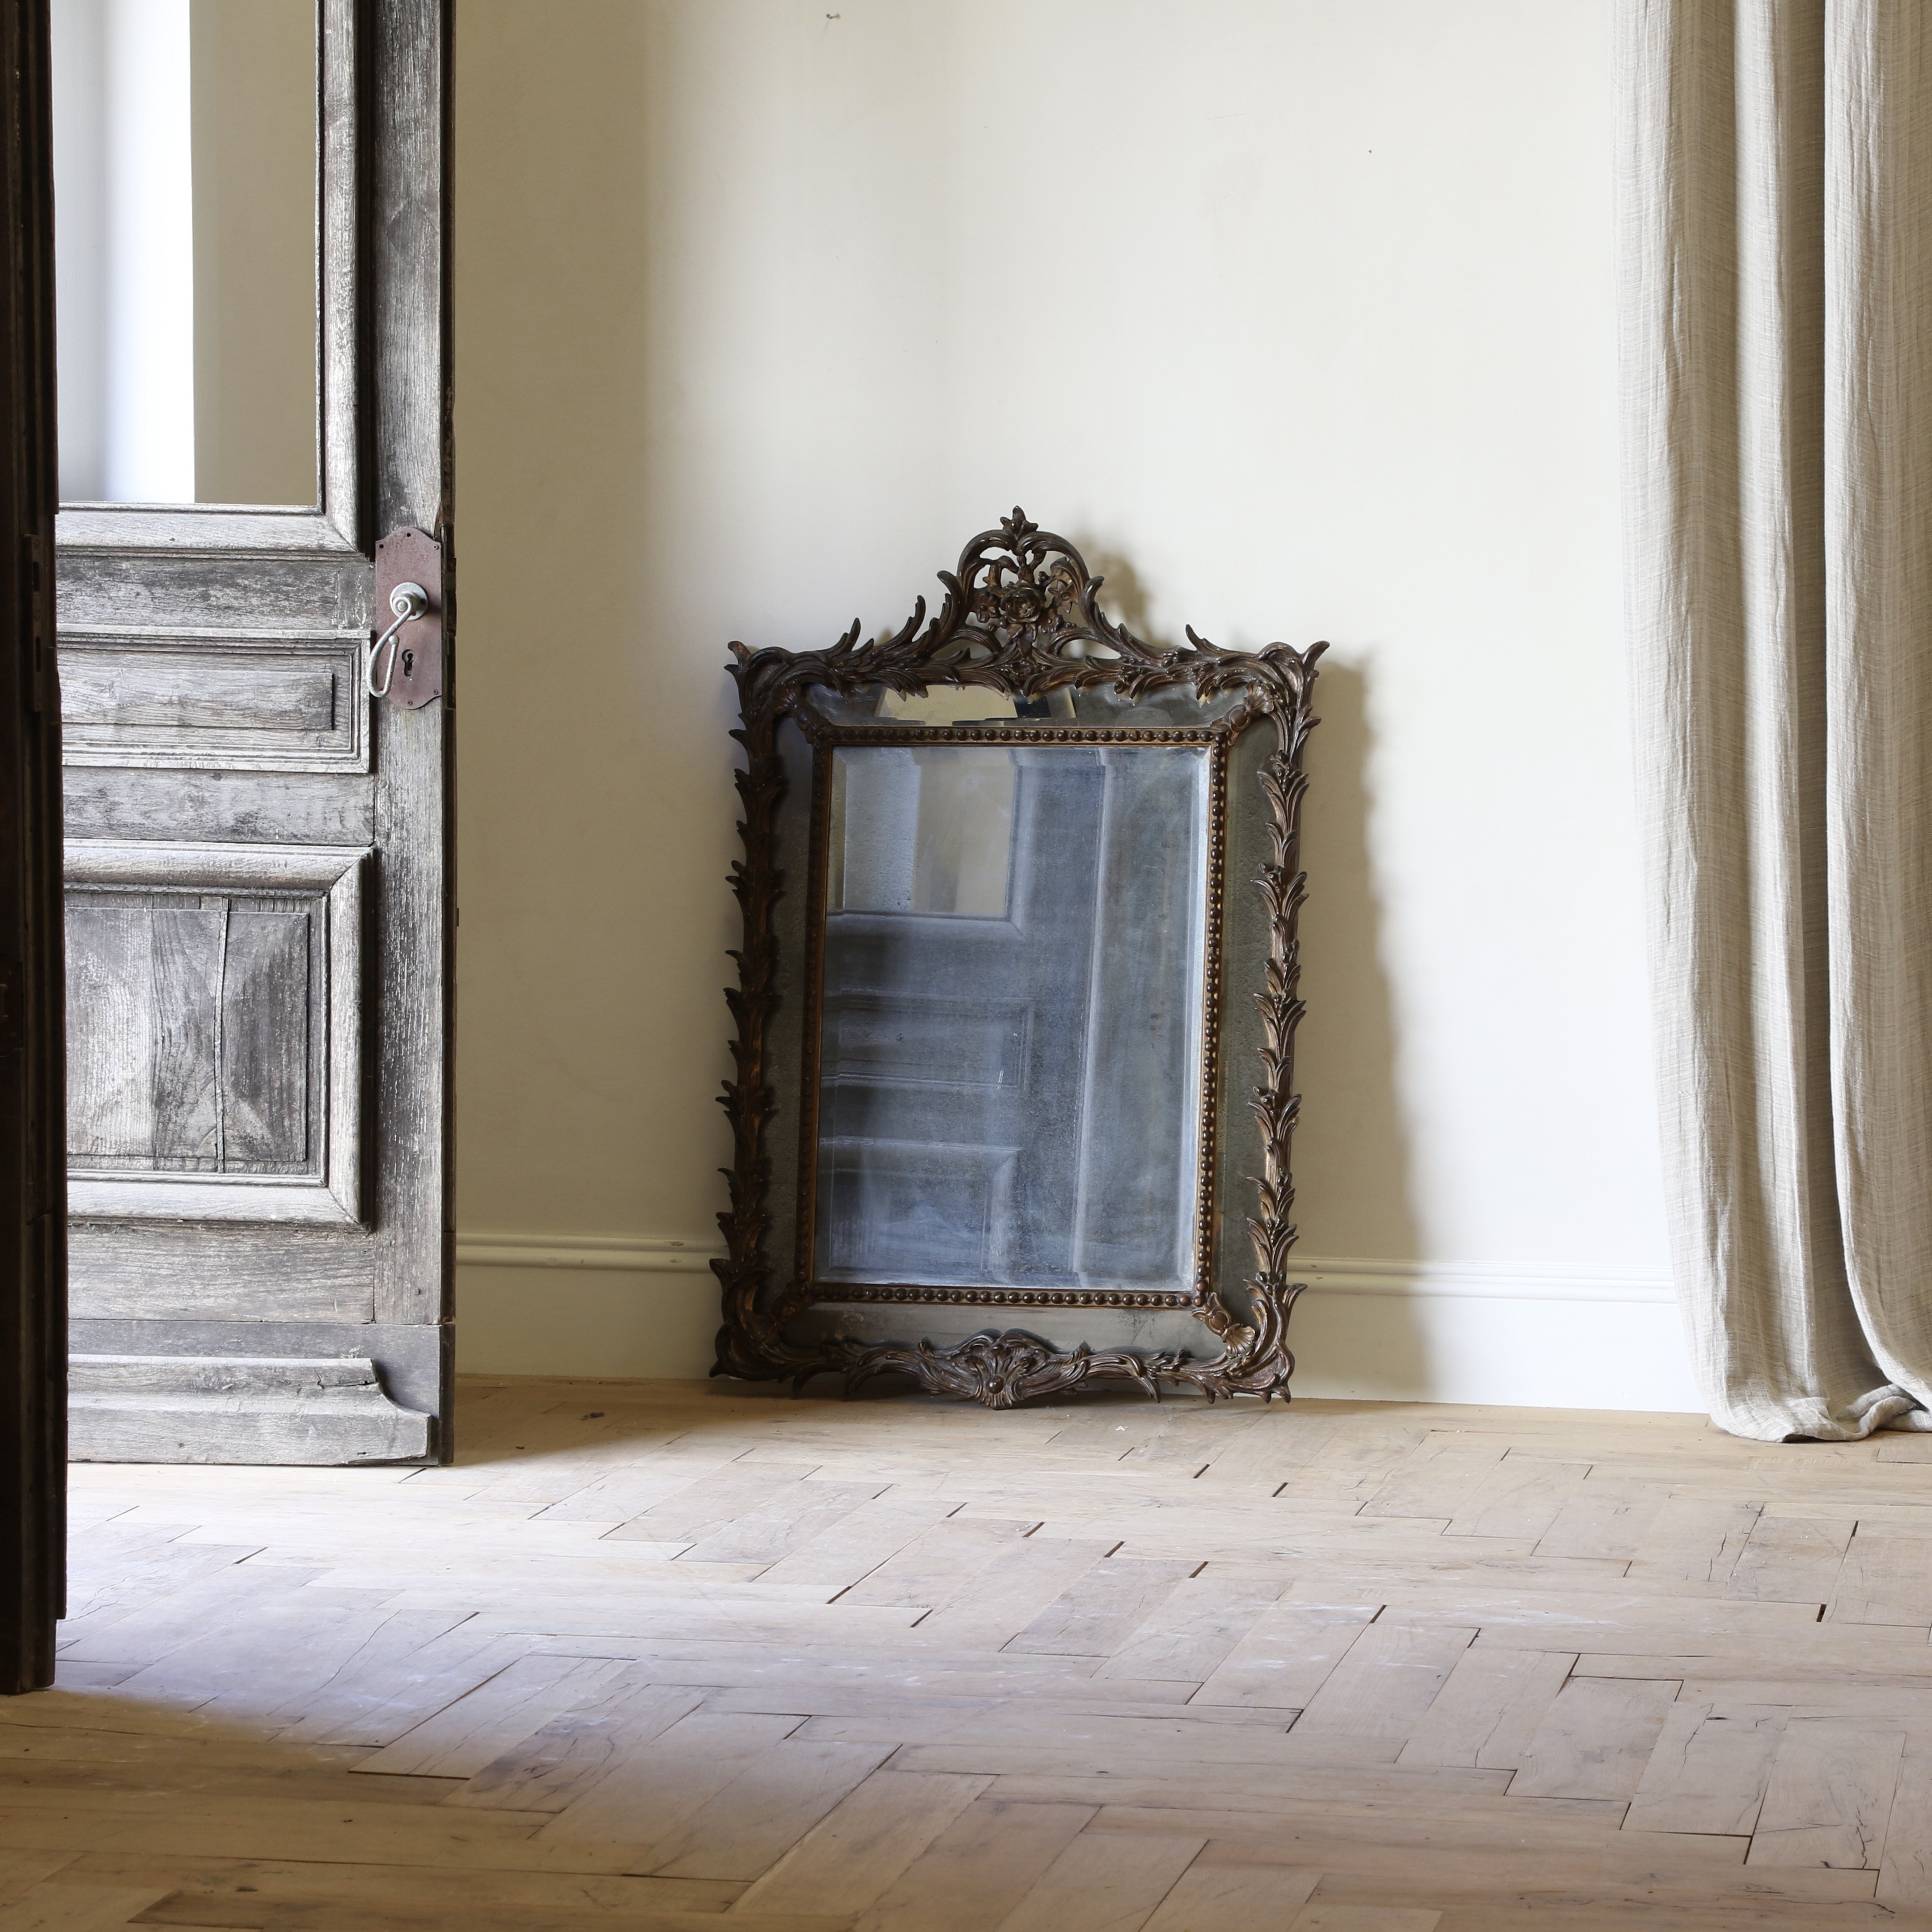 138-89 - A Stunning French 18th Century Rococo Mirror